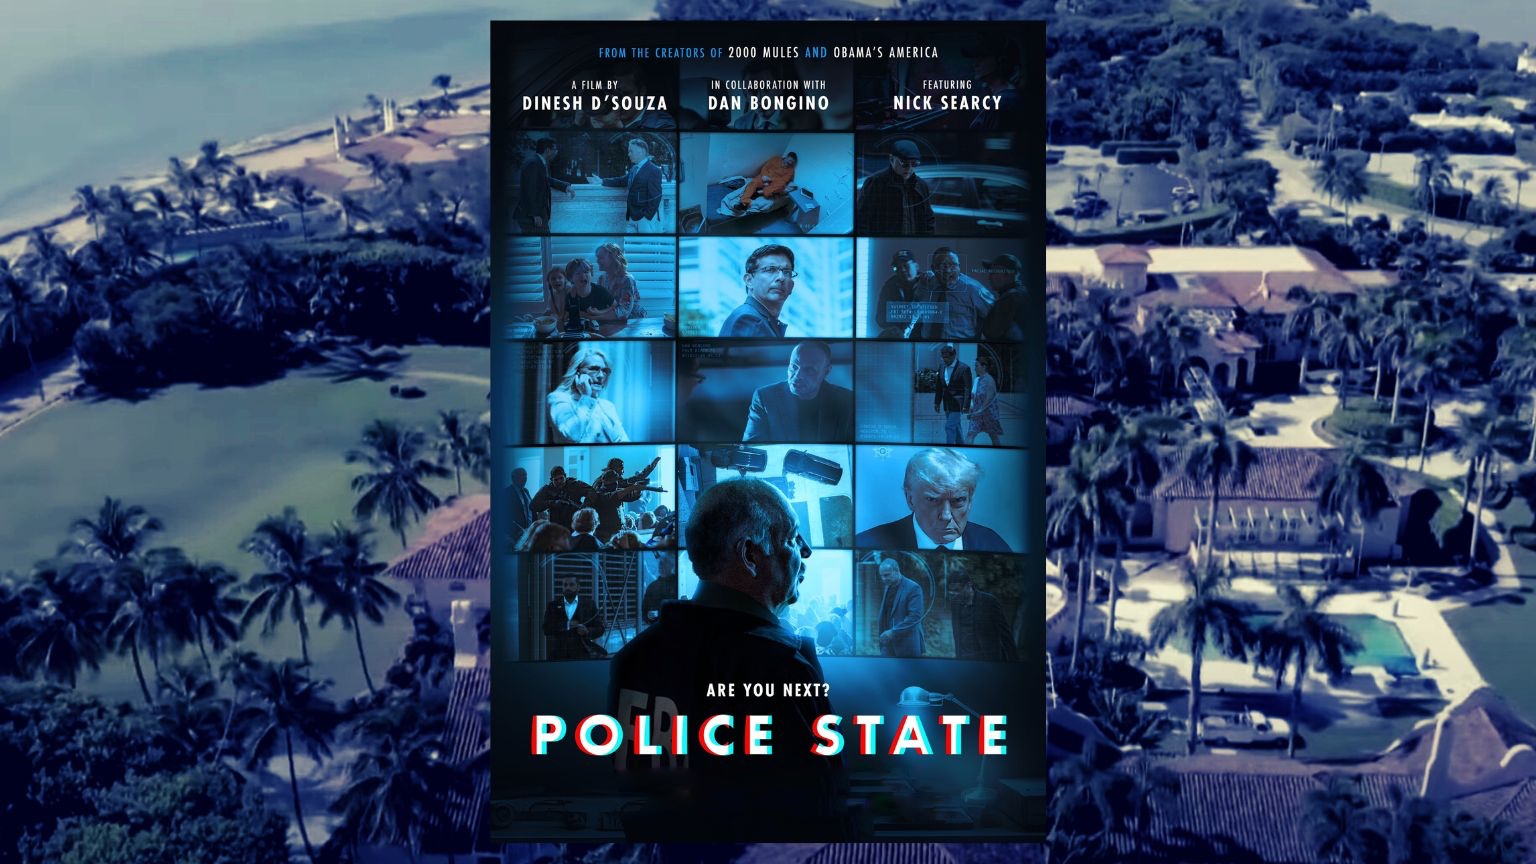 President Trump To Host “Police State” Documentary Red Carpet at Mar-a-Lago